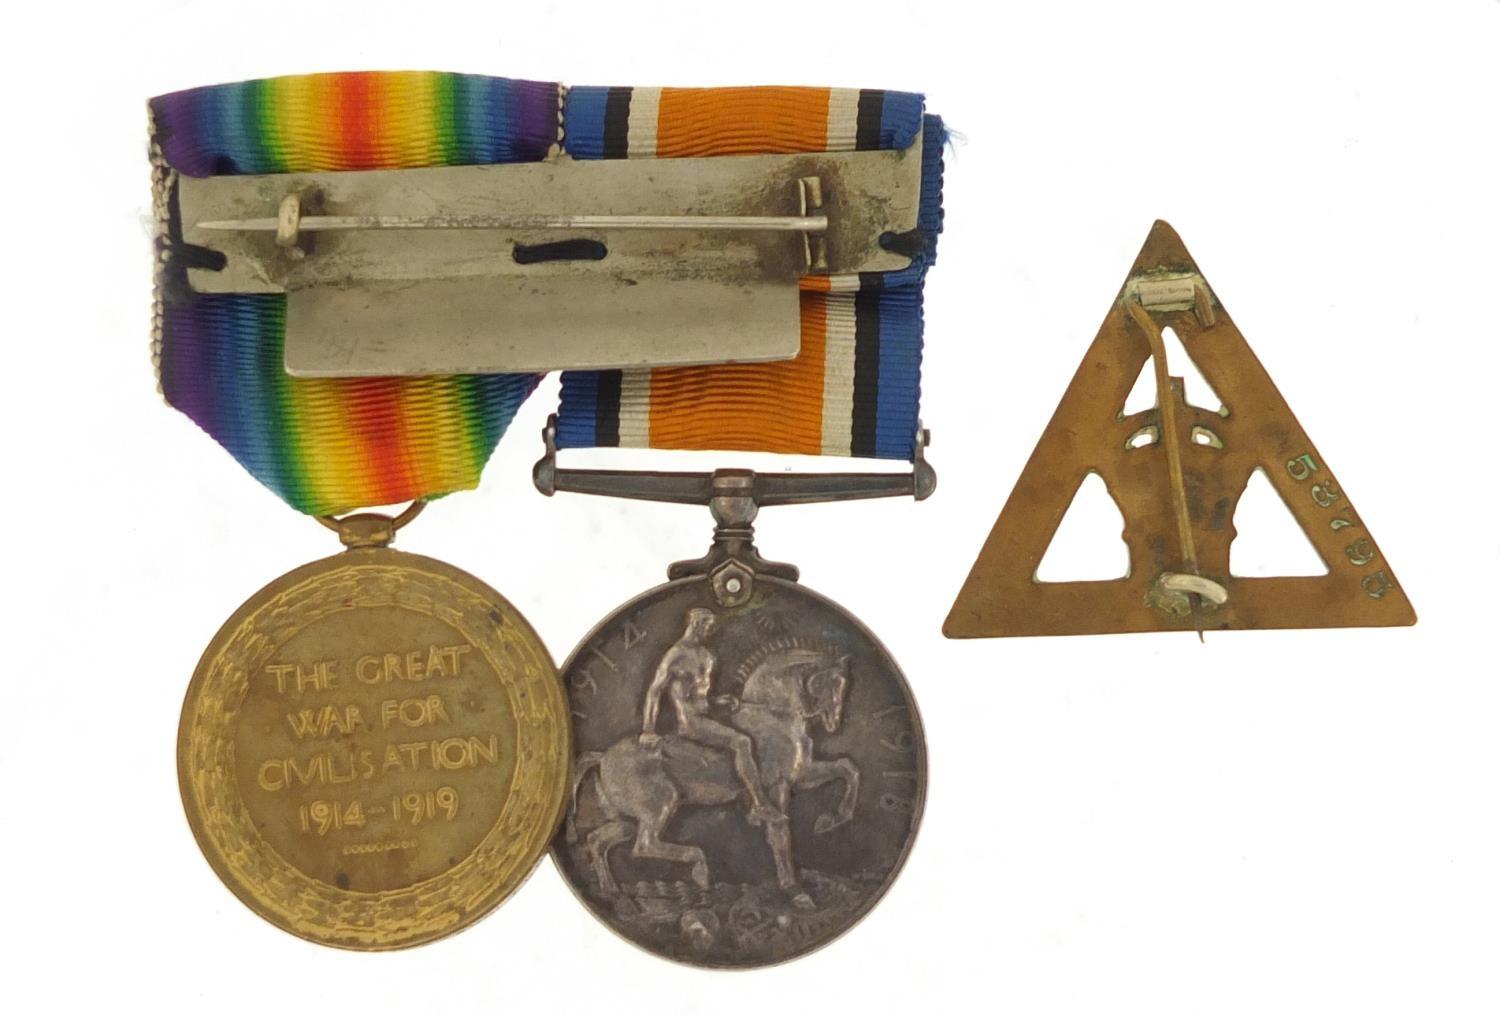 British Military World War I Pair awarded to L-41997GNR.W.A.JACKSON.R.A. with photographs of soldier - Image 2 of 4